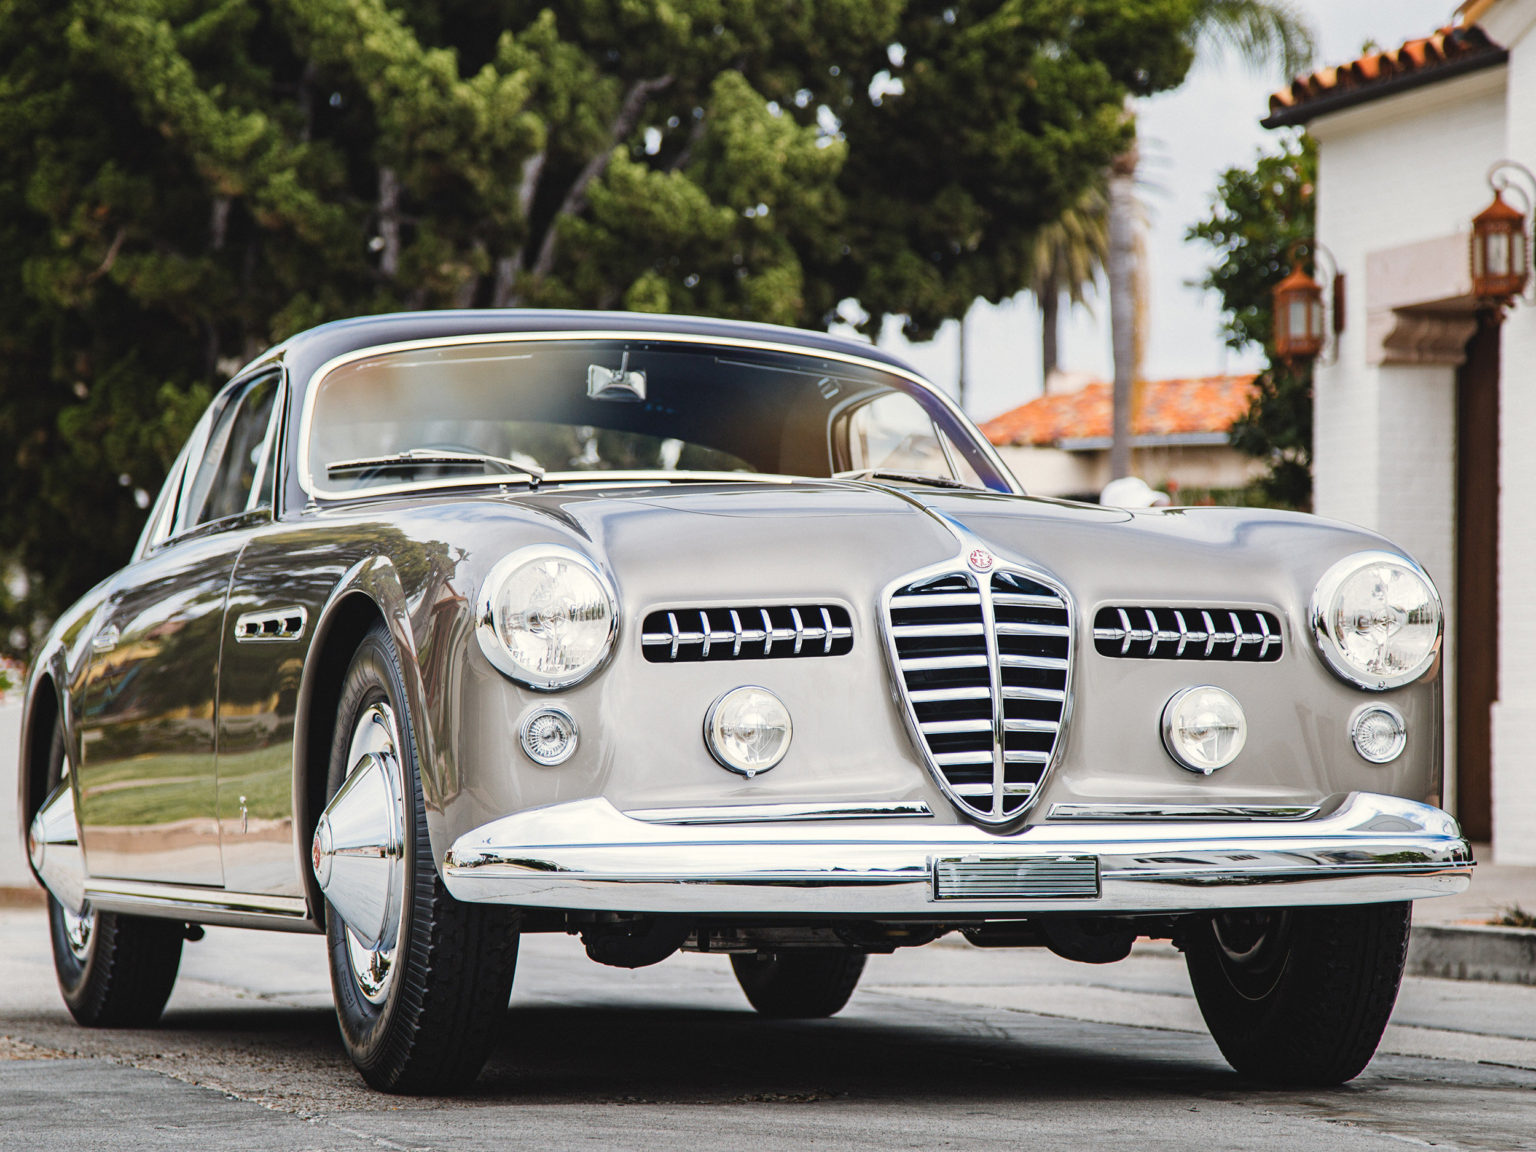 Two unique Alfa Romeos will be displayed at the Concours d'Elegance in September.